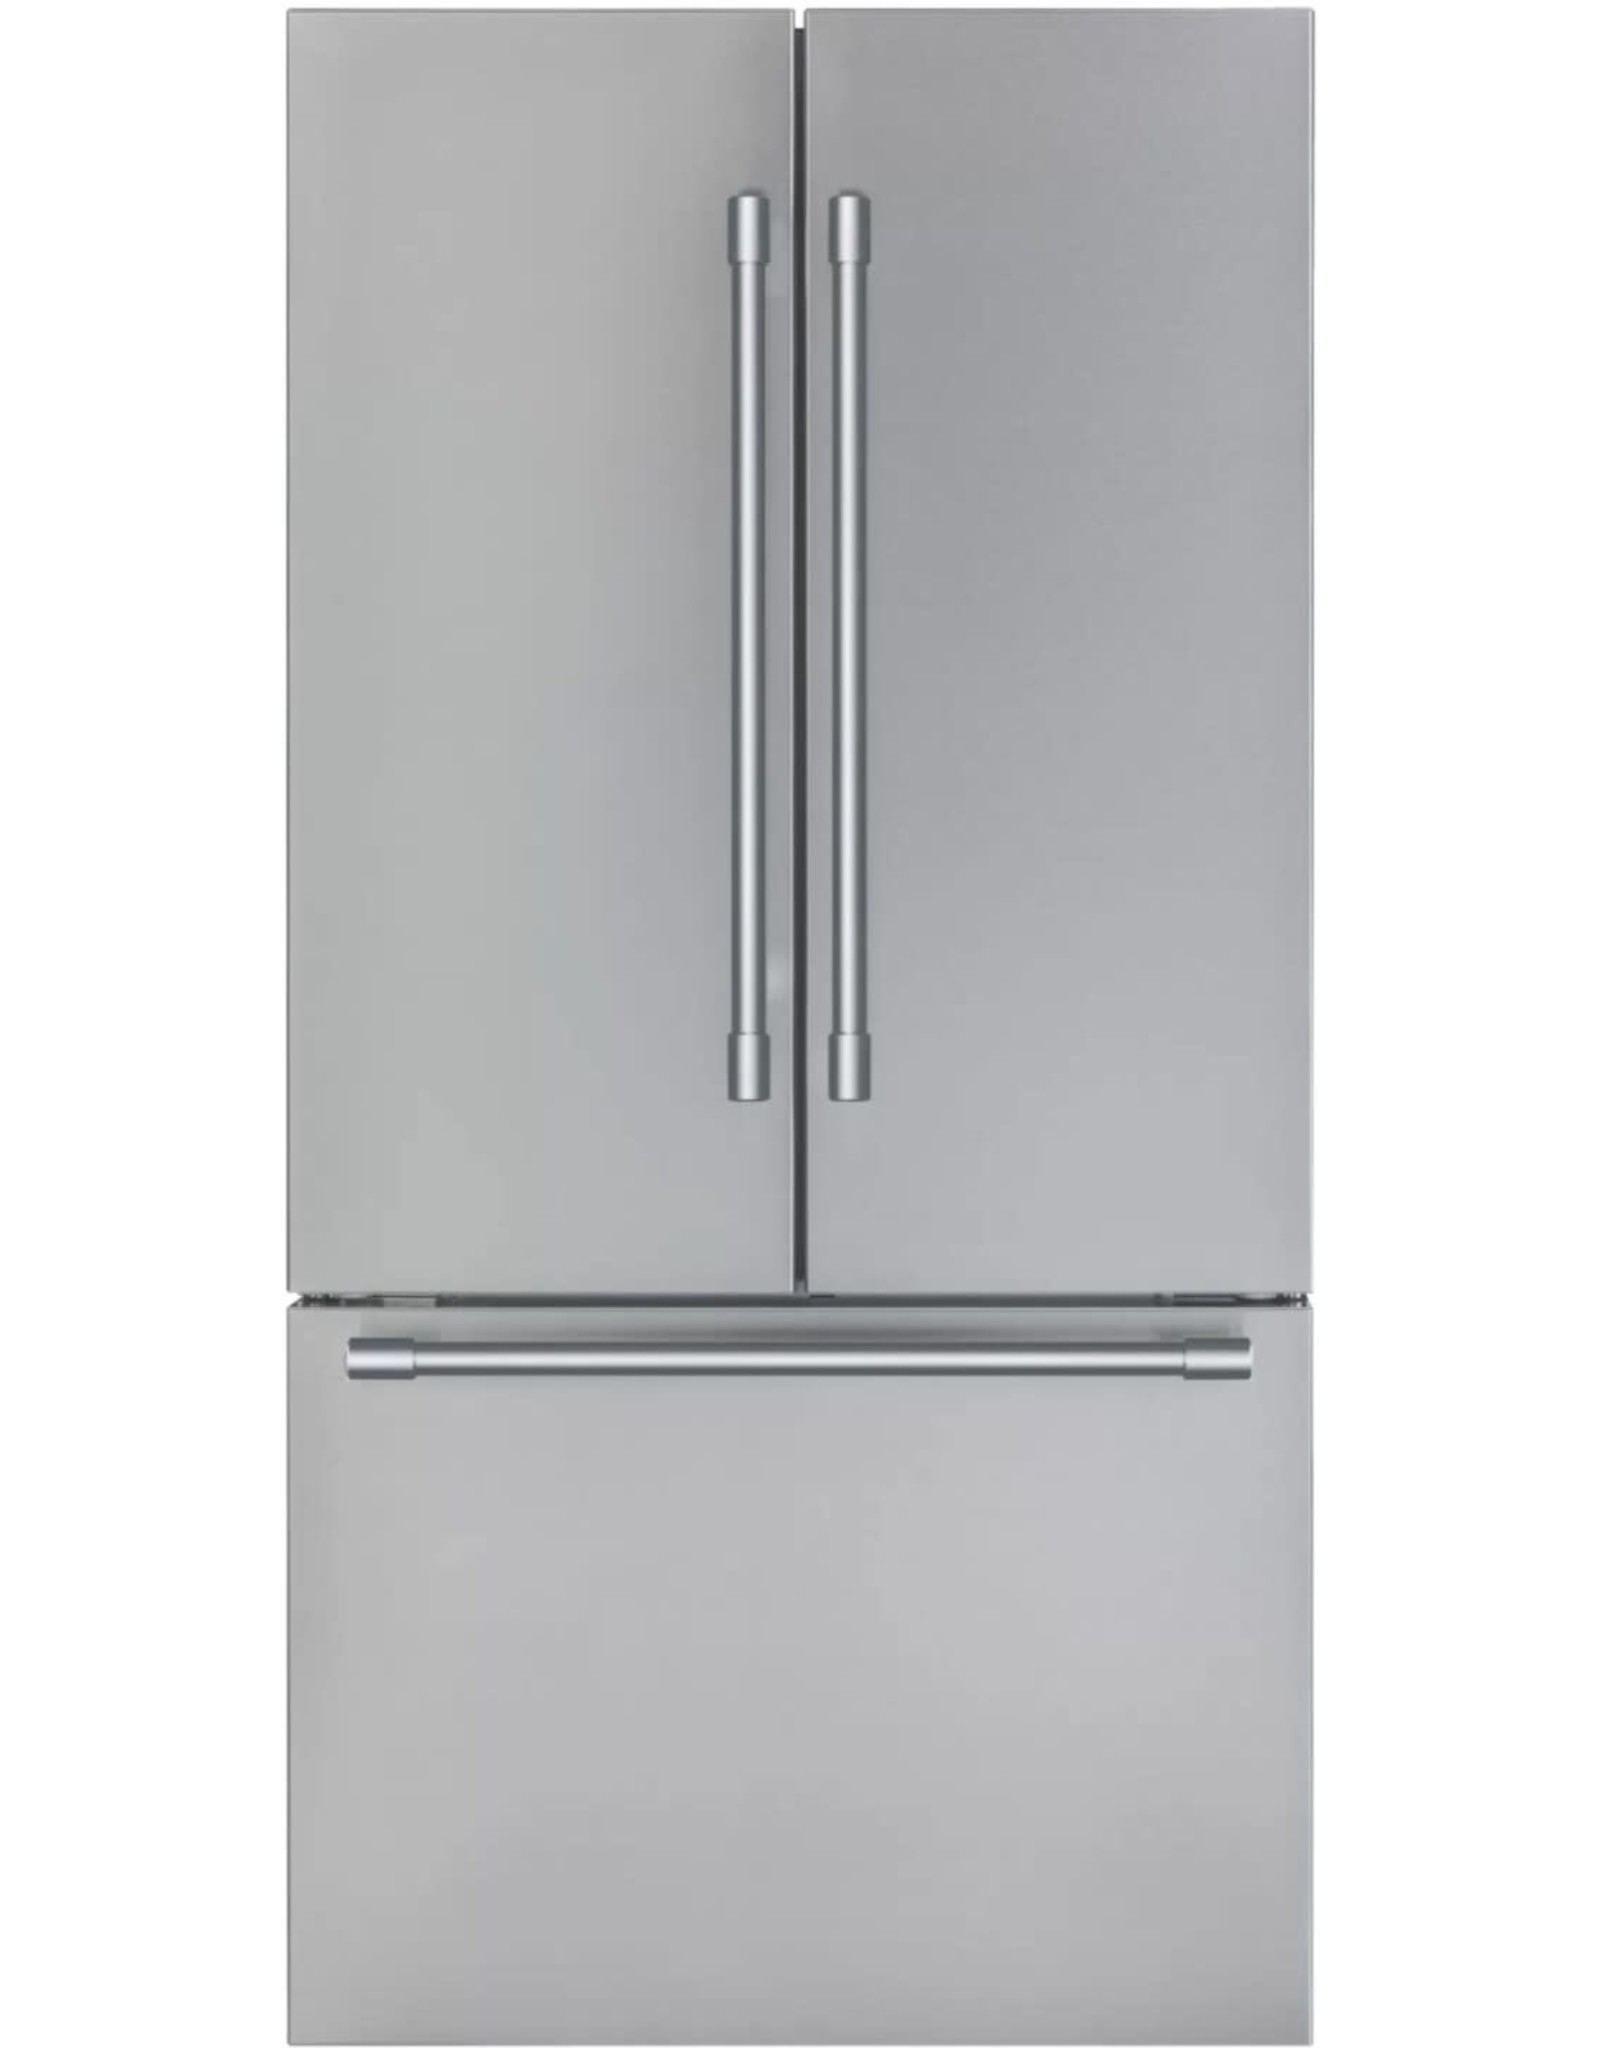 T36FT820NS 36 Inch Freestanding French Door Smart Refrigerator with 20.8 cu. ft. Capacity, Internal Water Dispenser, Diamond Ice Maker, Water Filter, Home Connect™ Compatibility, SuperFreeze®, SuperCool, ThermaFresh Drawers, ThermaFresh Mats, Sabbath Mode